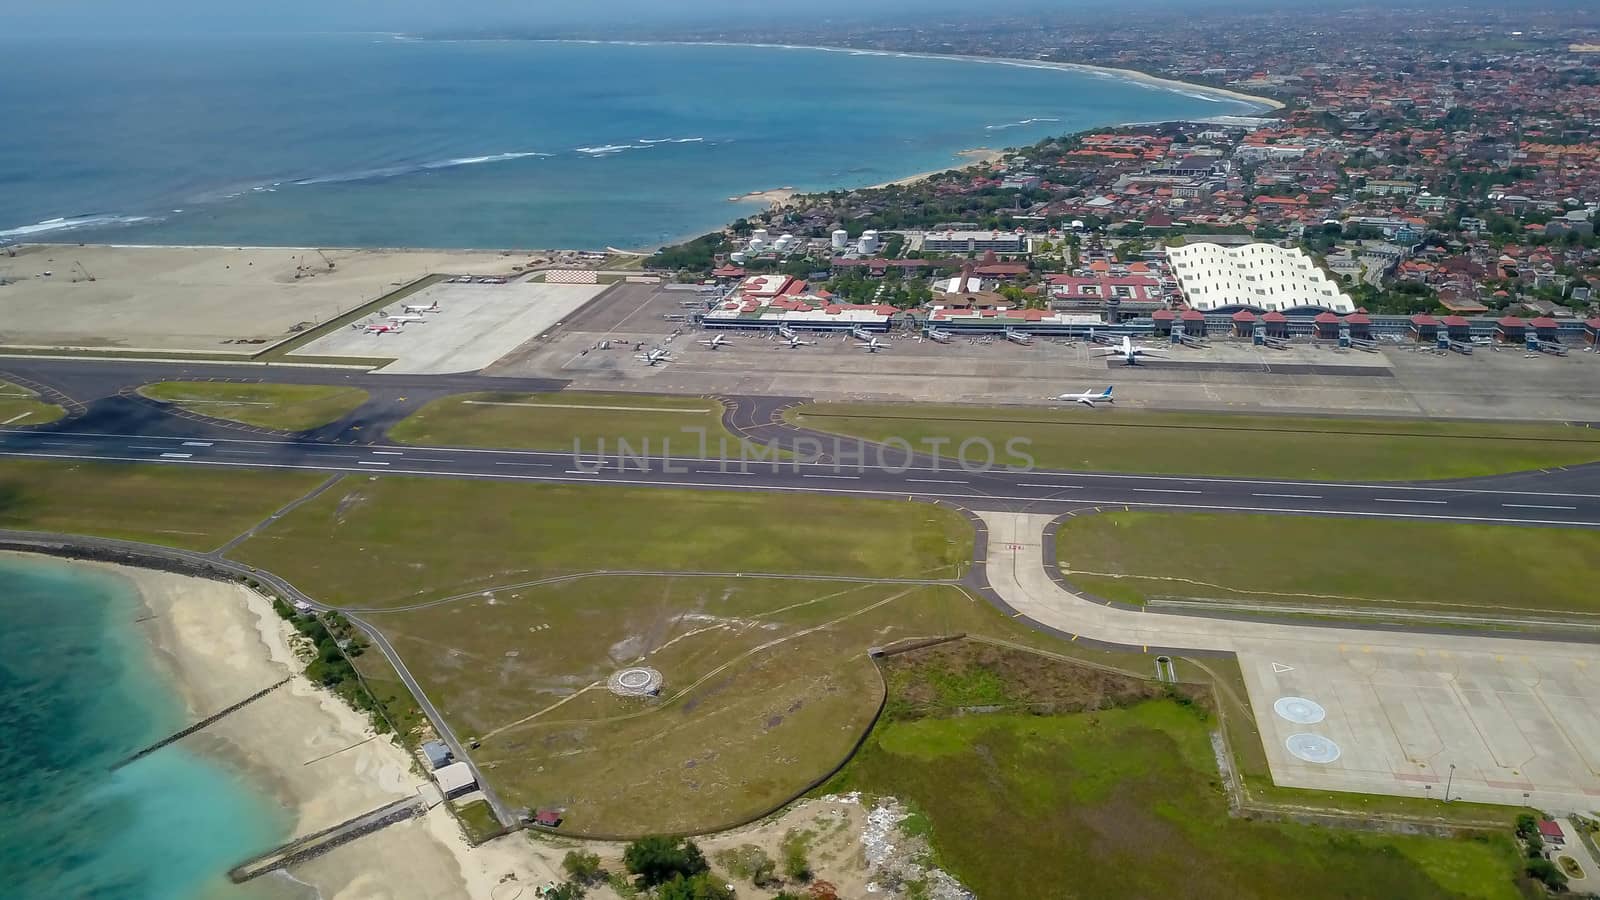 Aerial view of the runway from the top of the tower of the international airport controls Bali with a parked plane and several planes are on the runway. Aerial view to Ngurah Rai airport, Indonesia by Sanatana2008